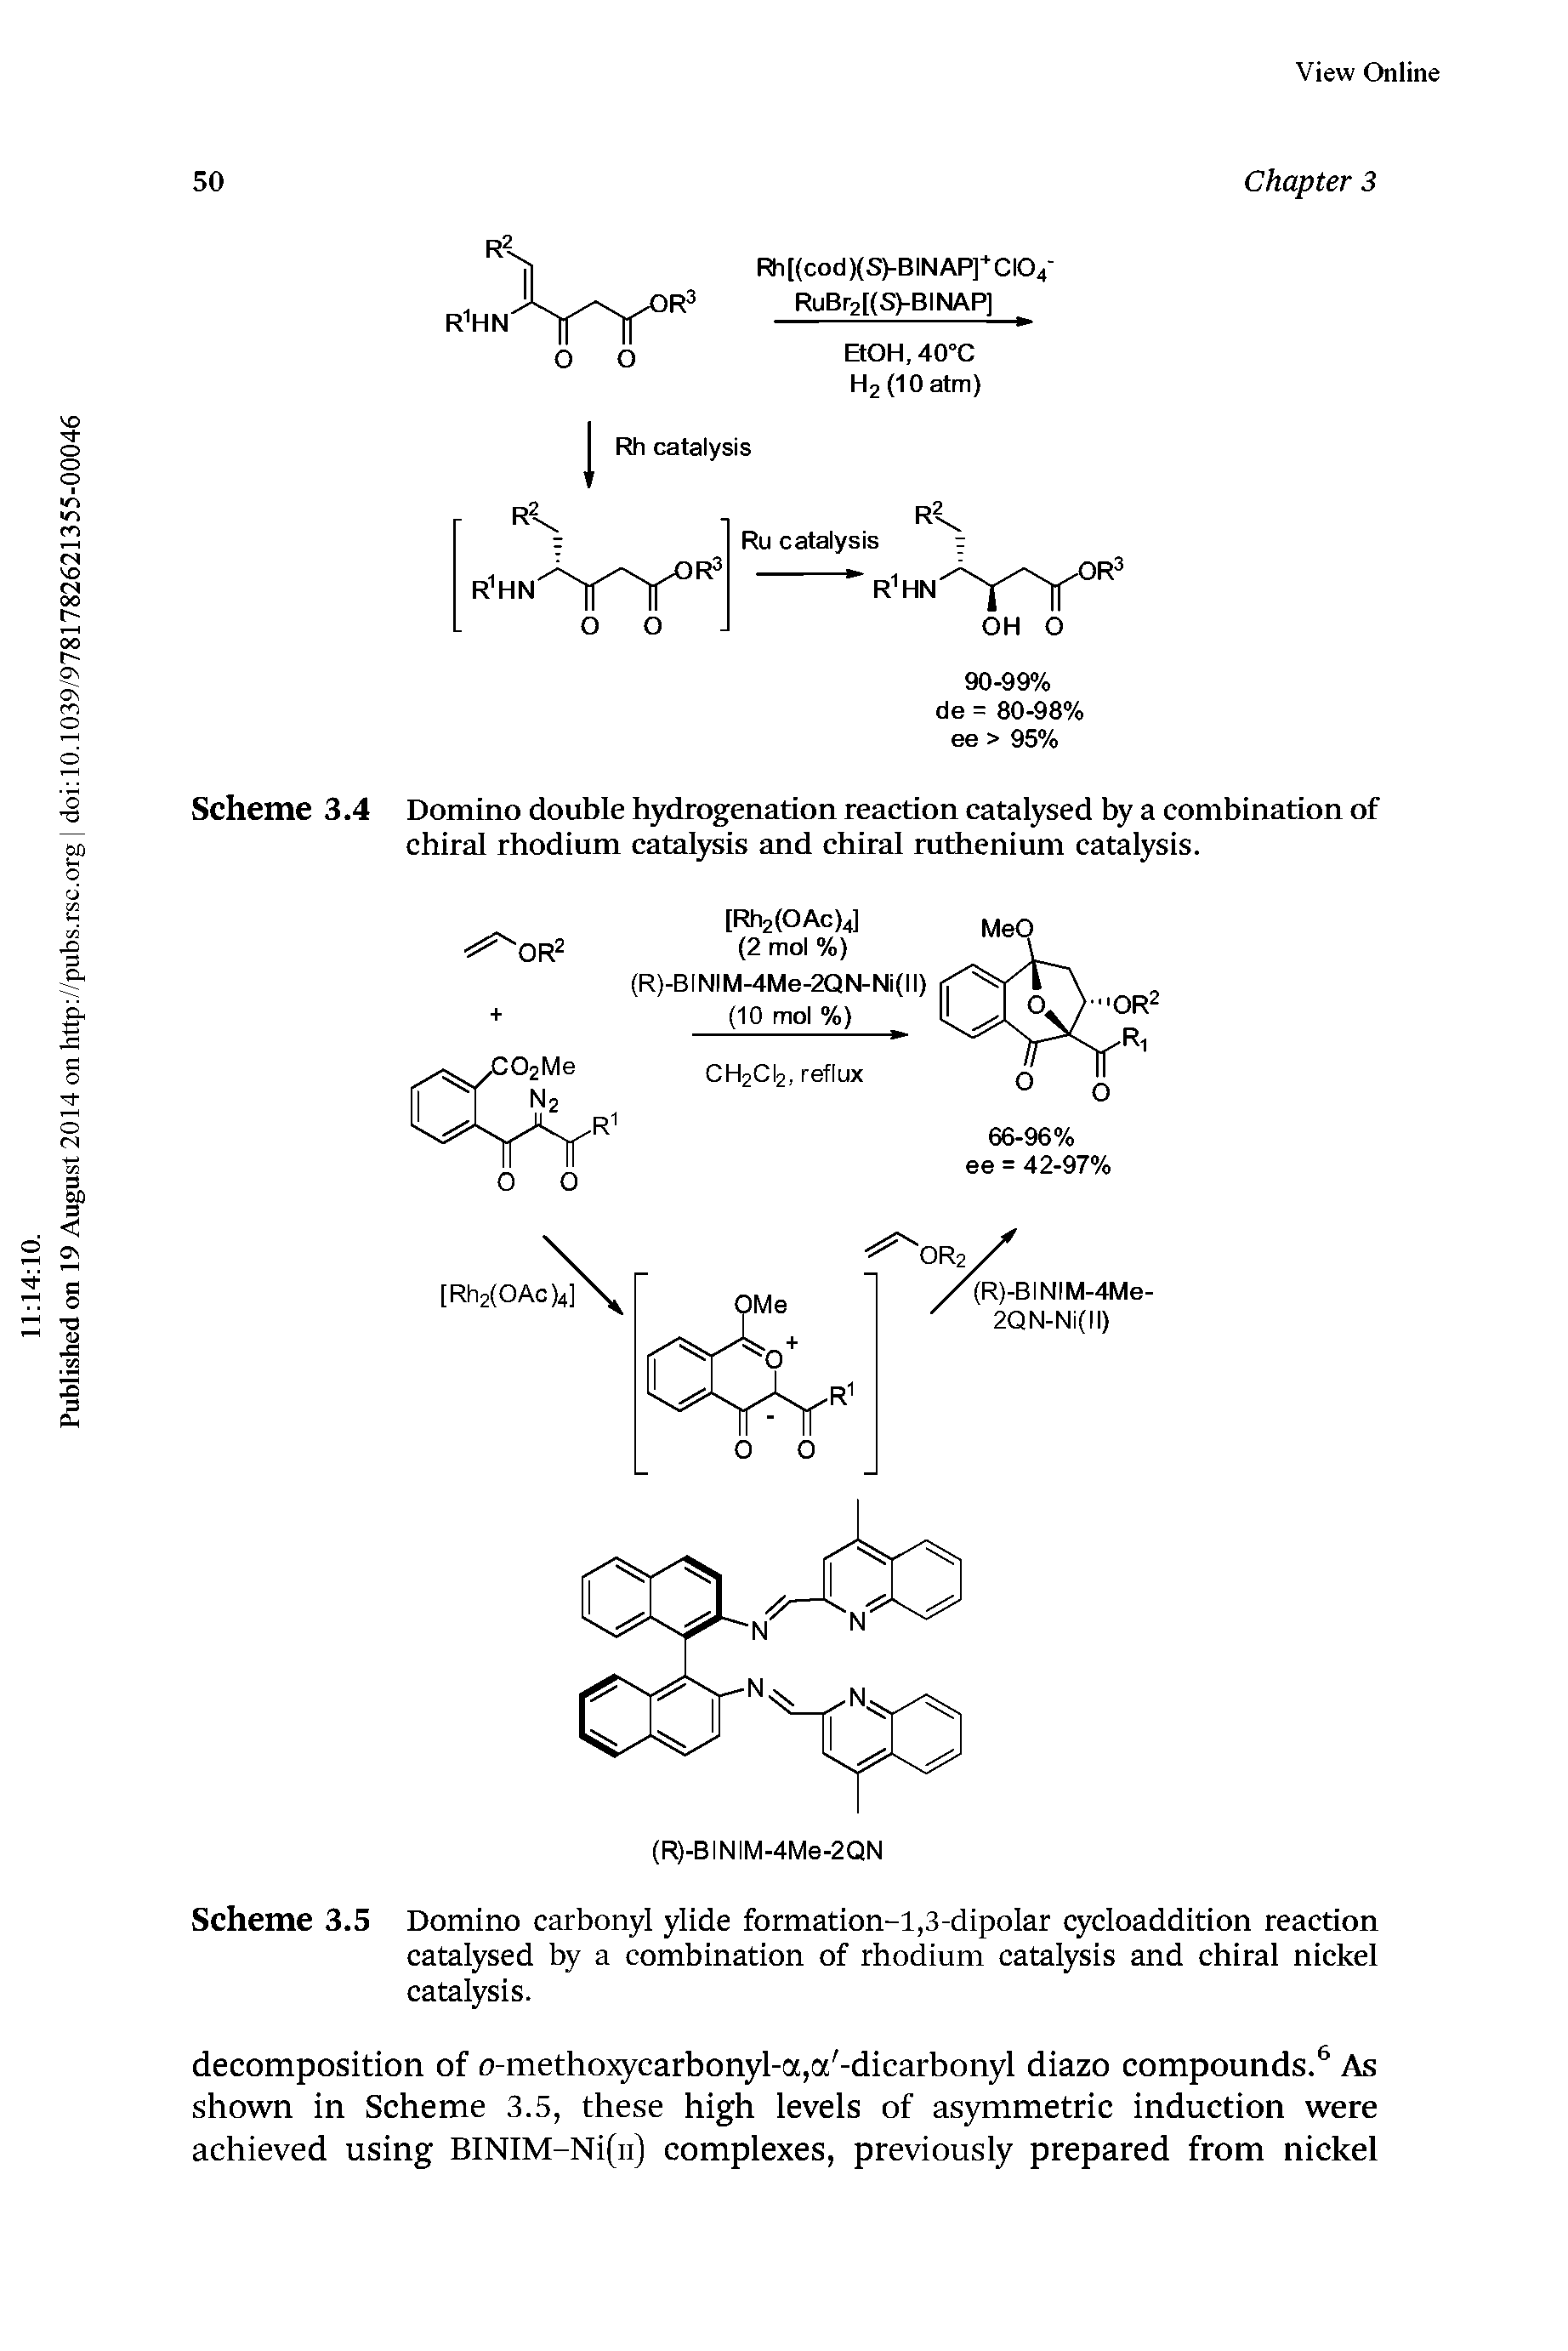 Scheme 3.5 Domino carbonyl ylide formation-l,3-dipolar cycloaddition reaction catalysed by a combination of rhodium catalysis and chiral nickel catalysis.